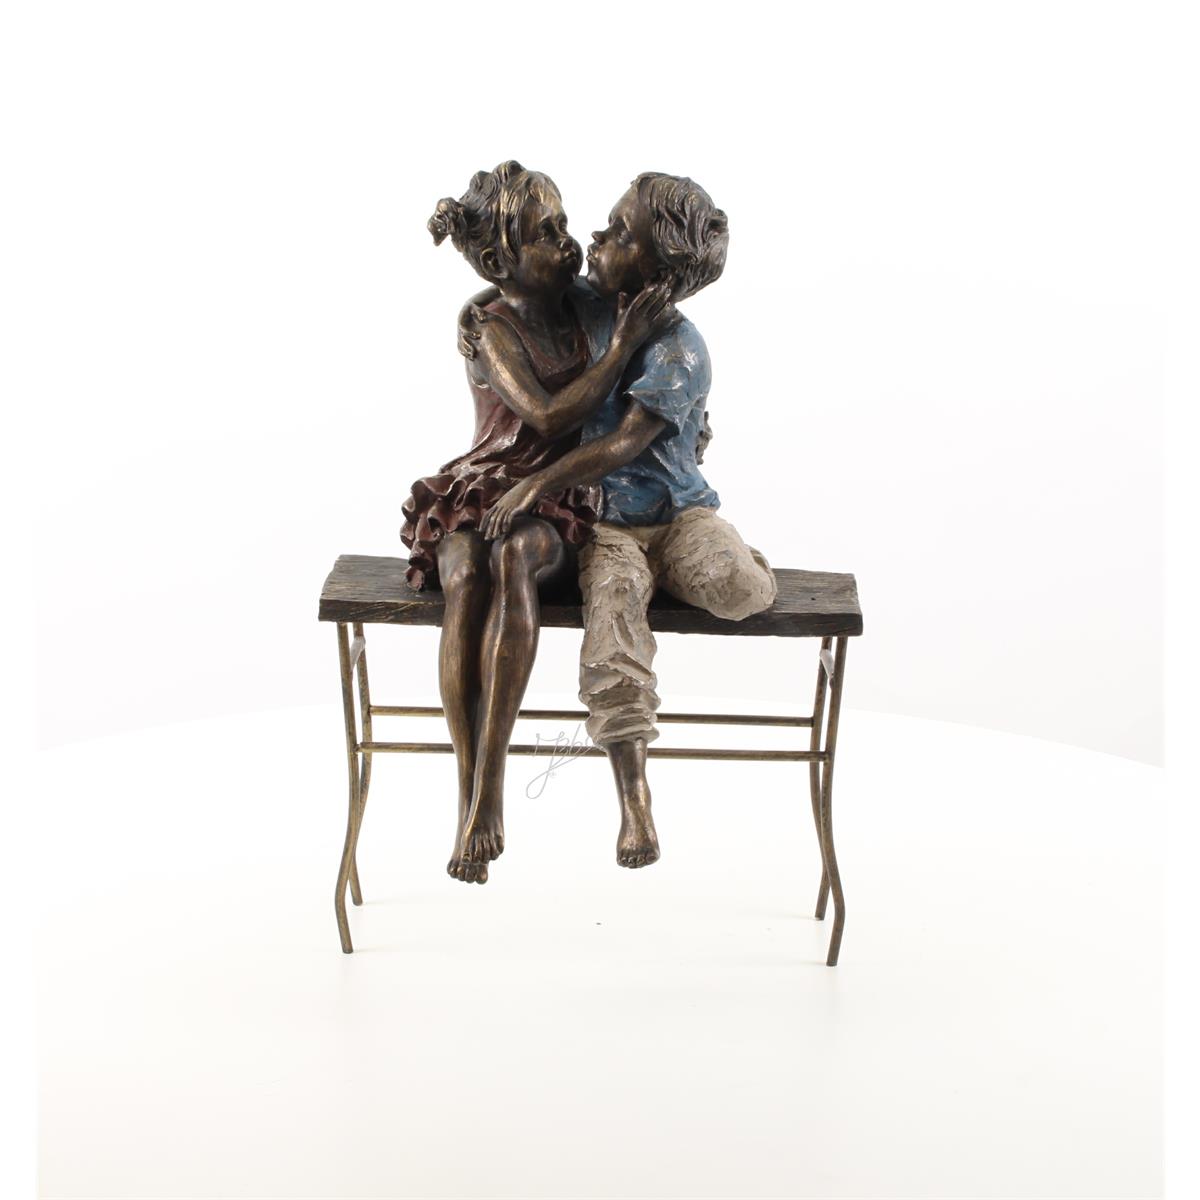 A RESIN FIGURINE OF A KISSING COUPLE